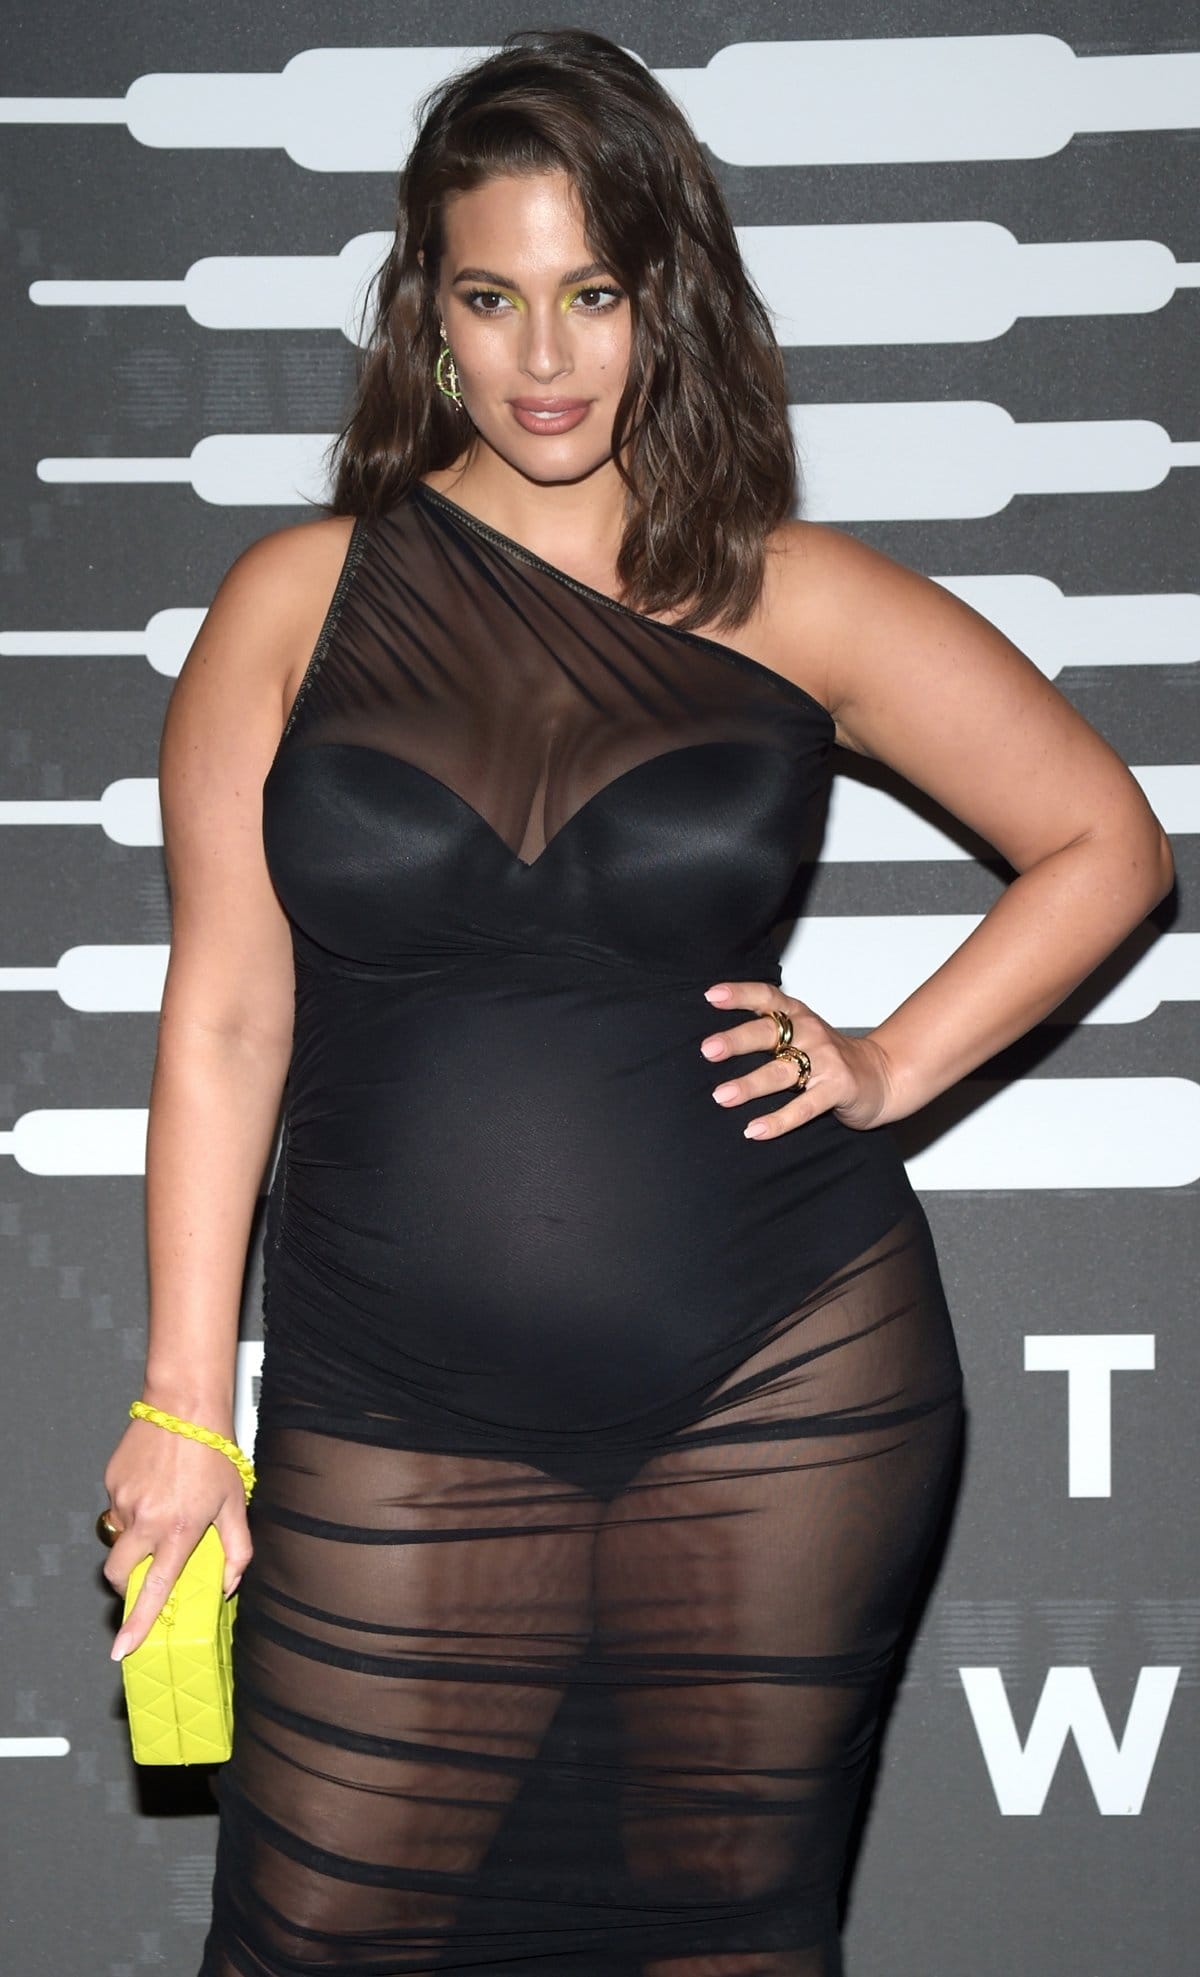 Ashley Graham carries a vintage Chanel bag from What Goes Around Come Around and shows off her baby bump at the Savage X Fenty fashion show